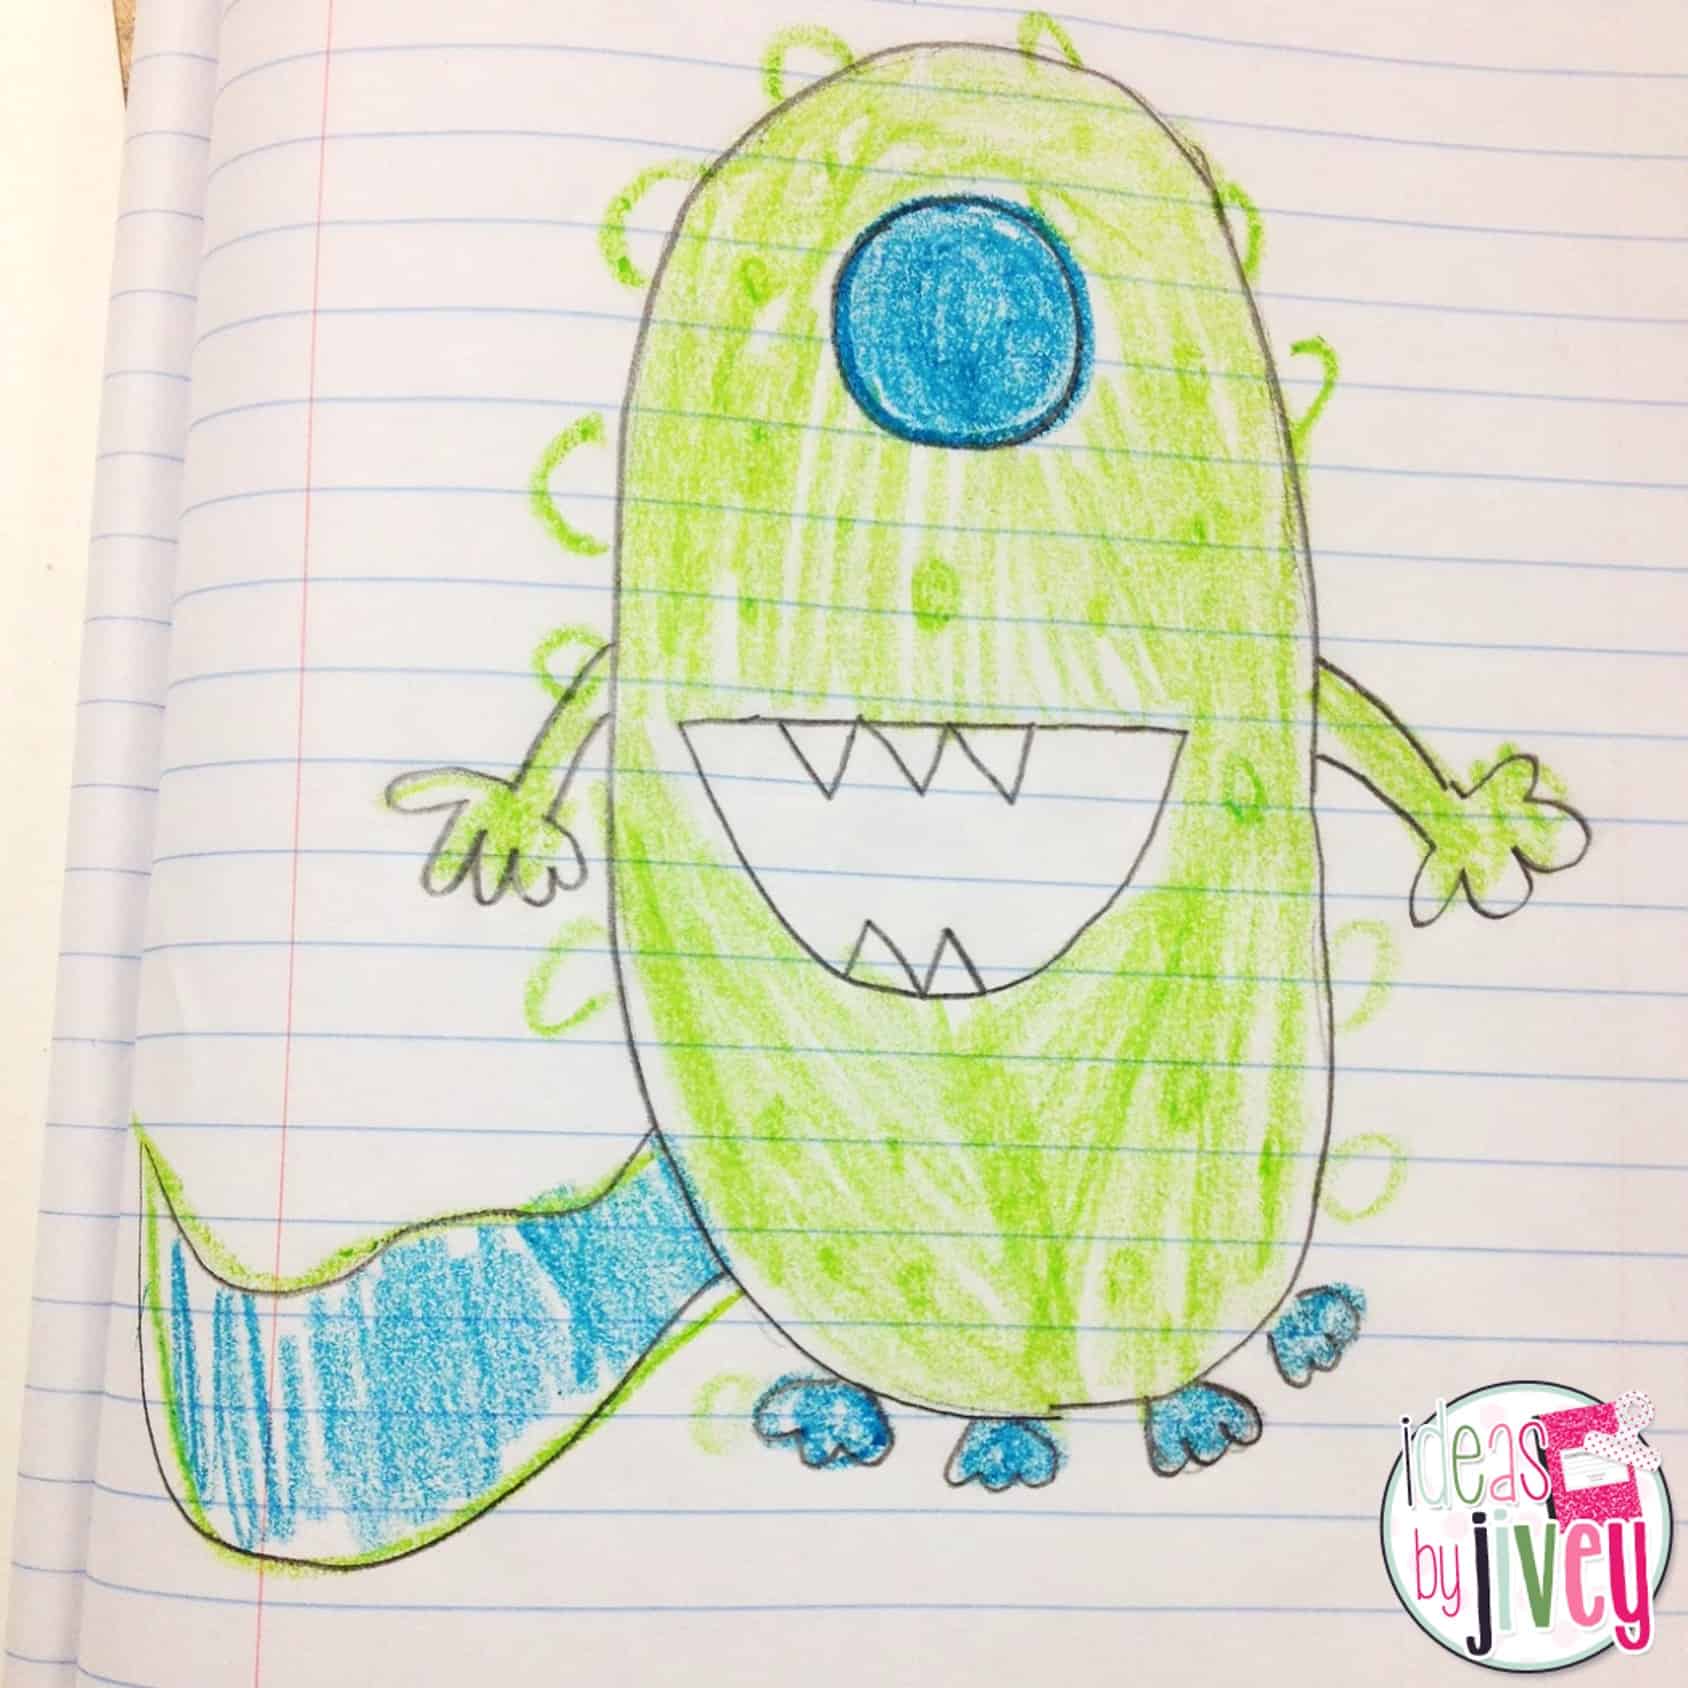 Descriptive writing is a tricky skill for students to master, but with mentor text modeling and practice, they can! Check out this free lesson download for the mentor text, I Need My Monster to help with "show, don't tell" writing. #mentortext #2ndgrade #3rdgrade #4thgrade #5thgrade